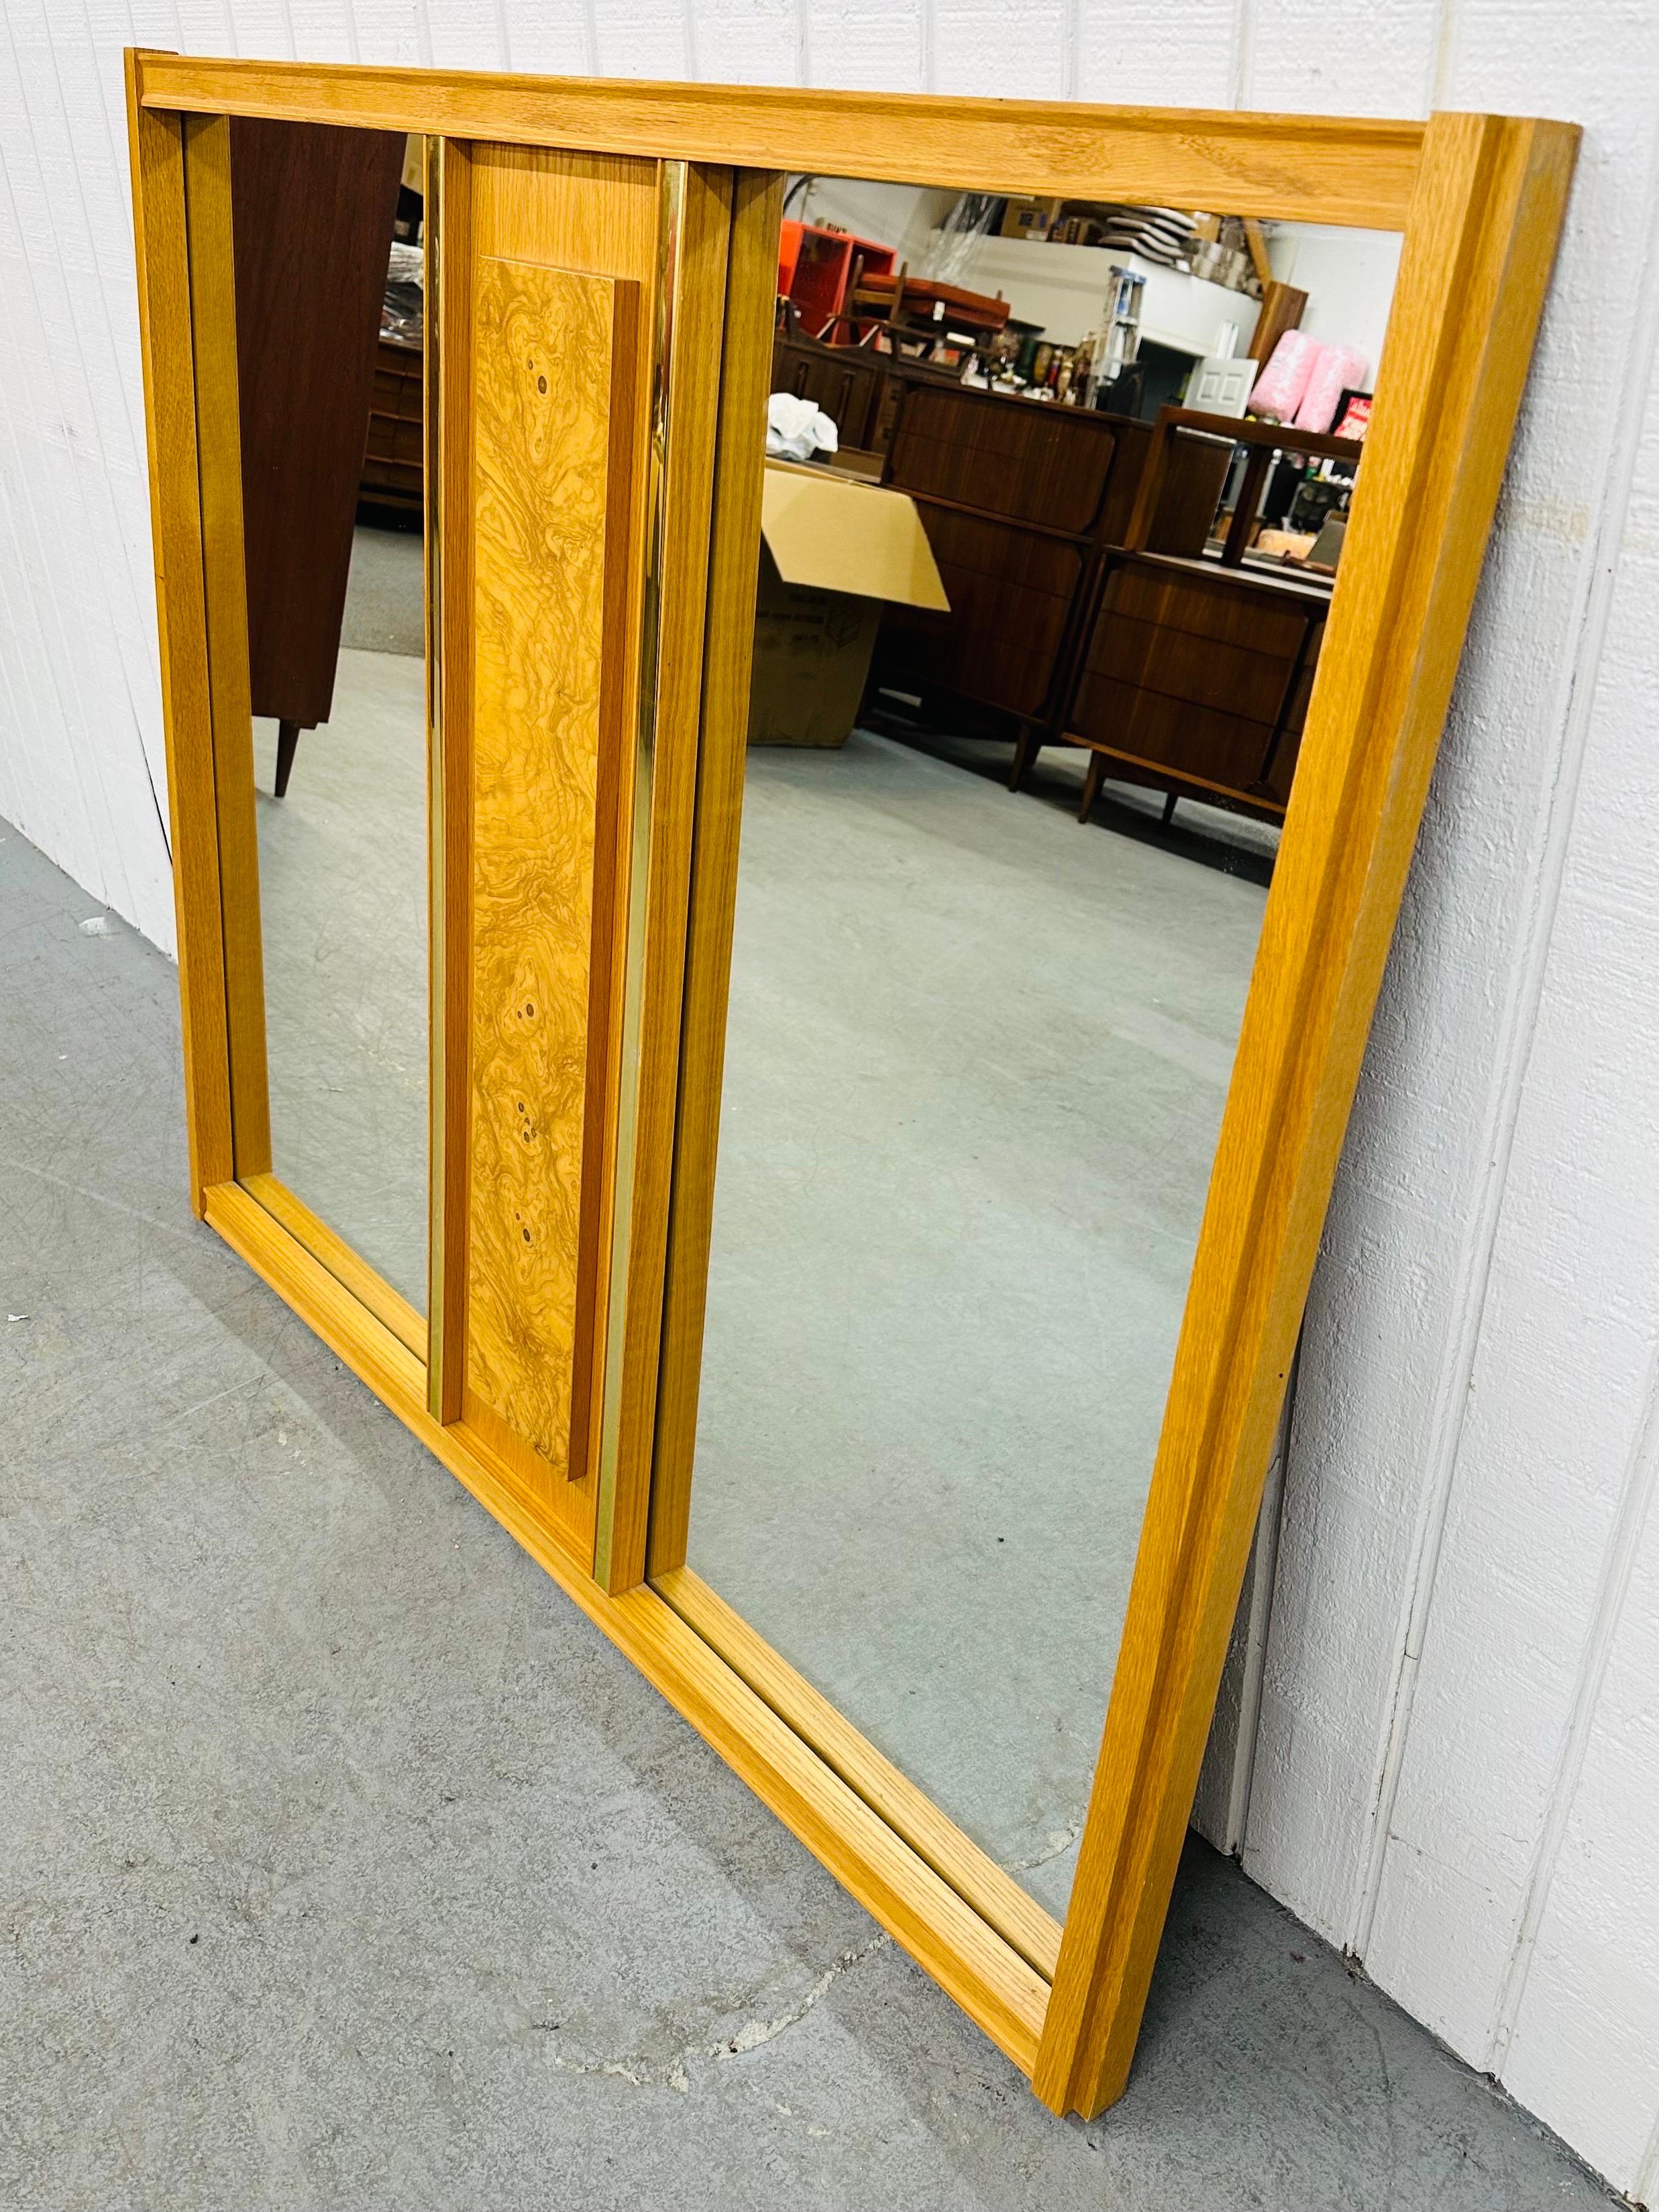 This listing is for a Mid-Century Modern Double Burled Wood Wall Mirror. Featuring a straight line design, rectangular mirror on each side, brutalist burled wood block in the center, brass accents, and a beautiful blonde oak finish. This is an